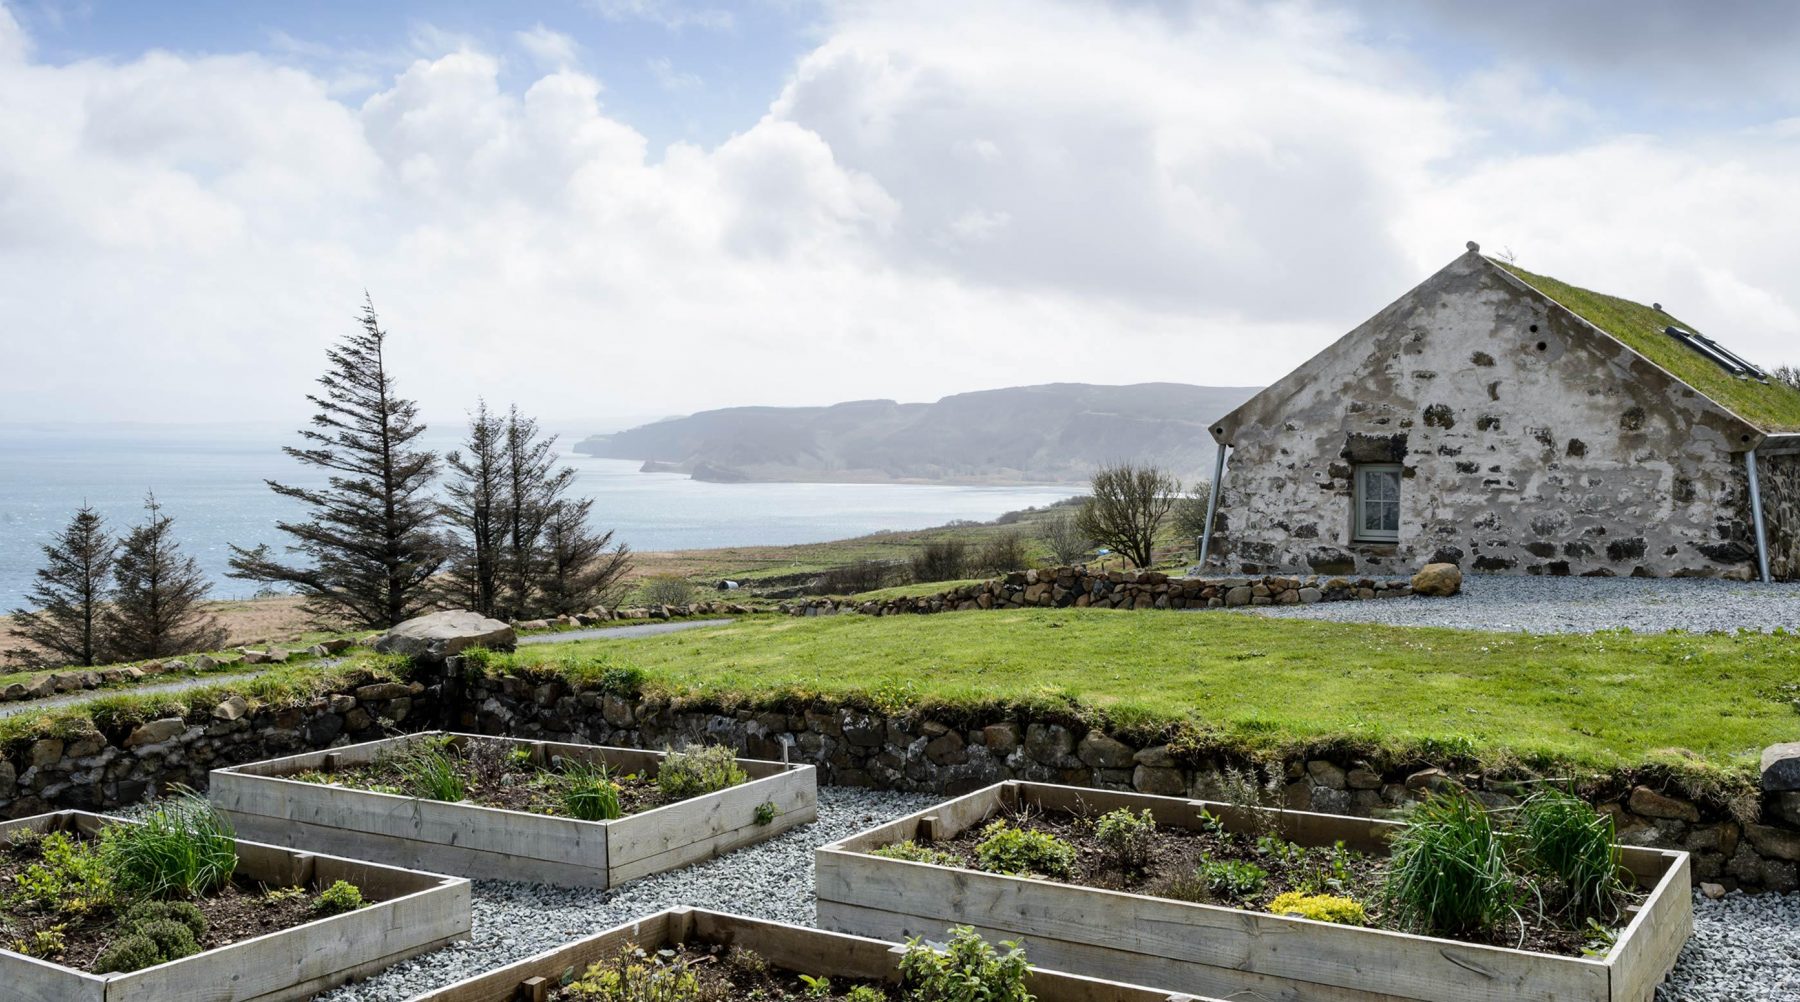 Blackhouse Cottage – A renovated Hebridean Blackhouse with a traditional turf roof. Views to the beach at Bein an Sguirr.